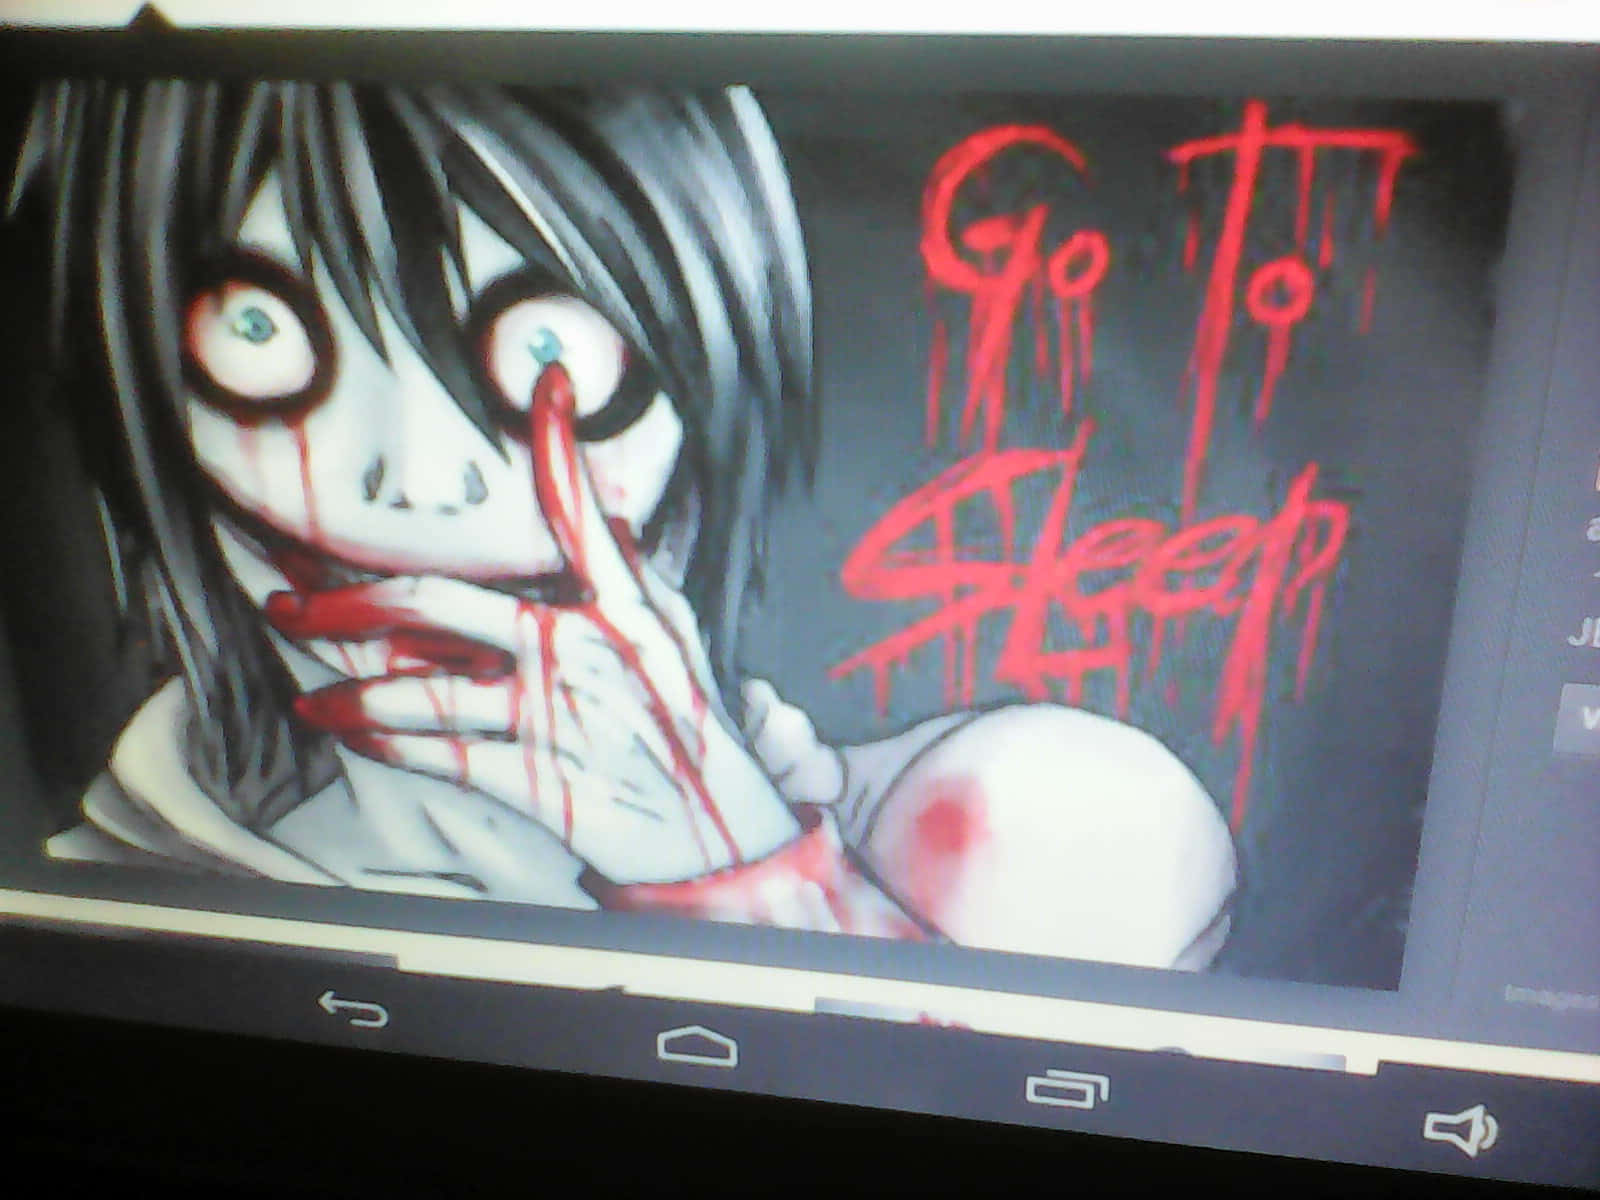 "Jeff the Killer strikes fear in all who encounter him"